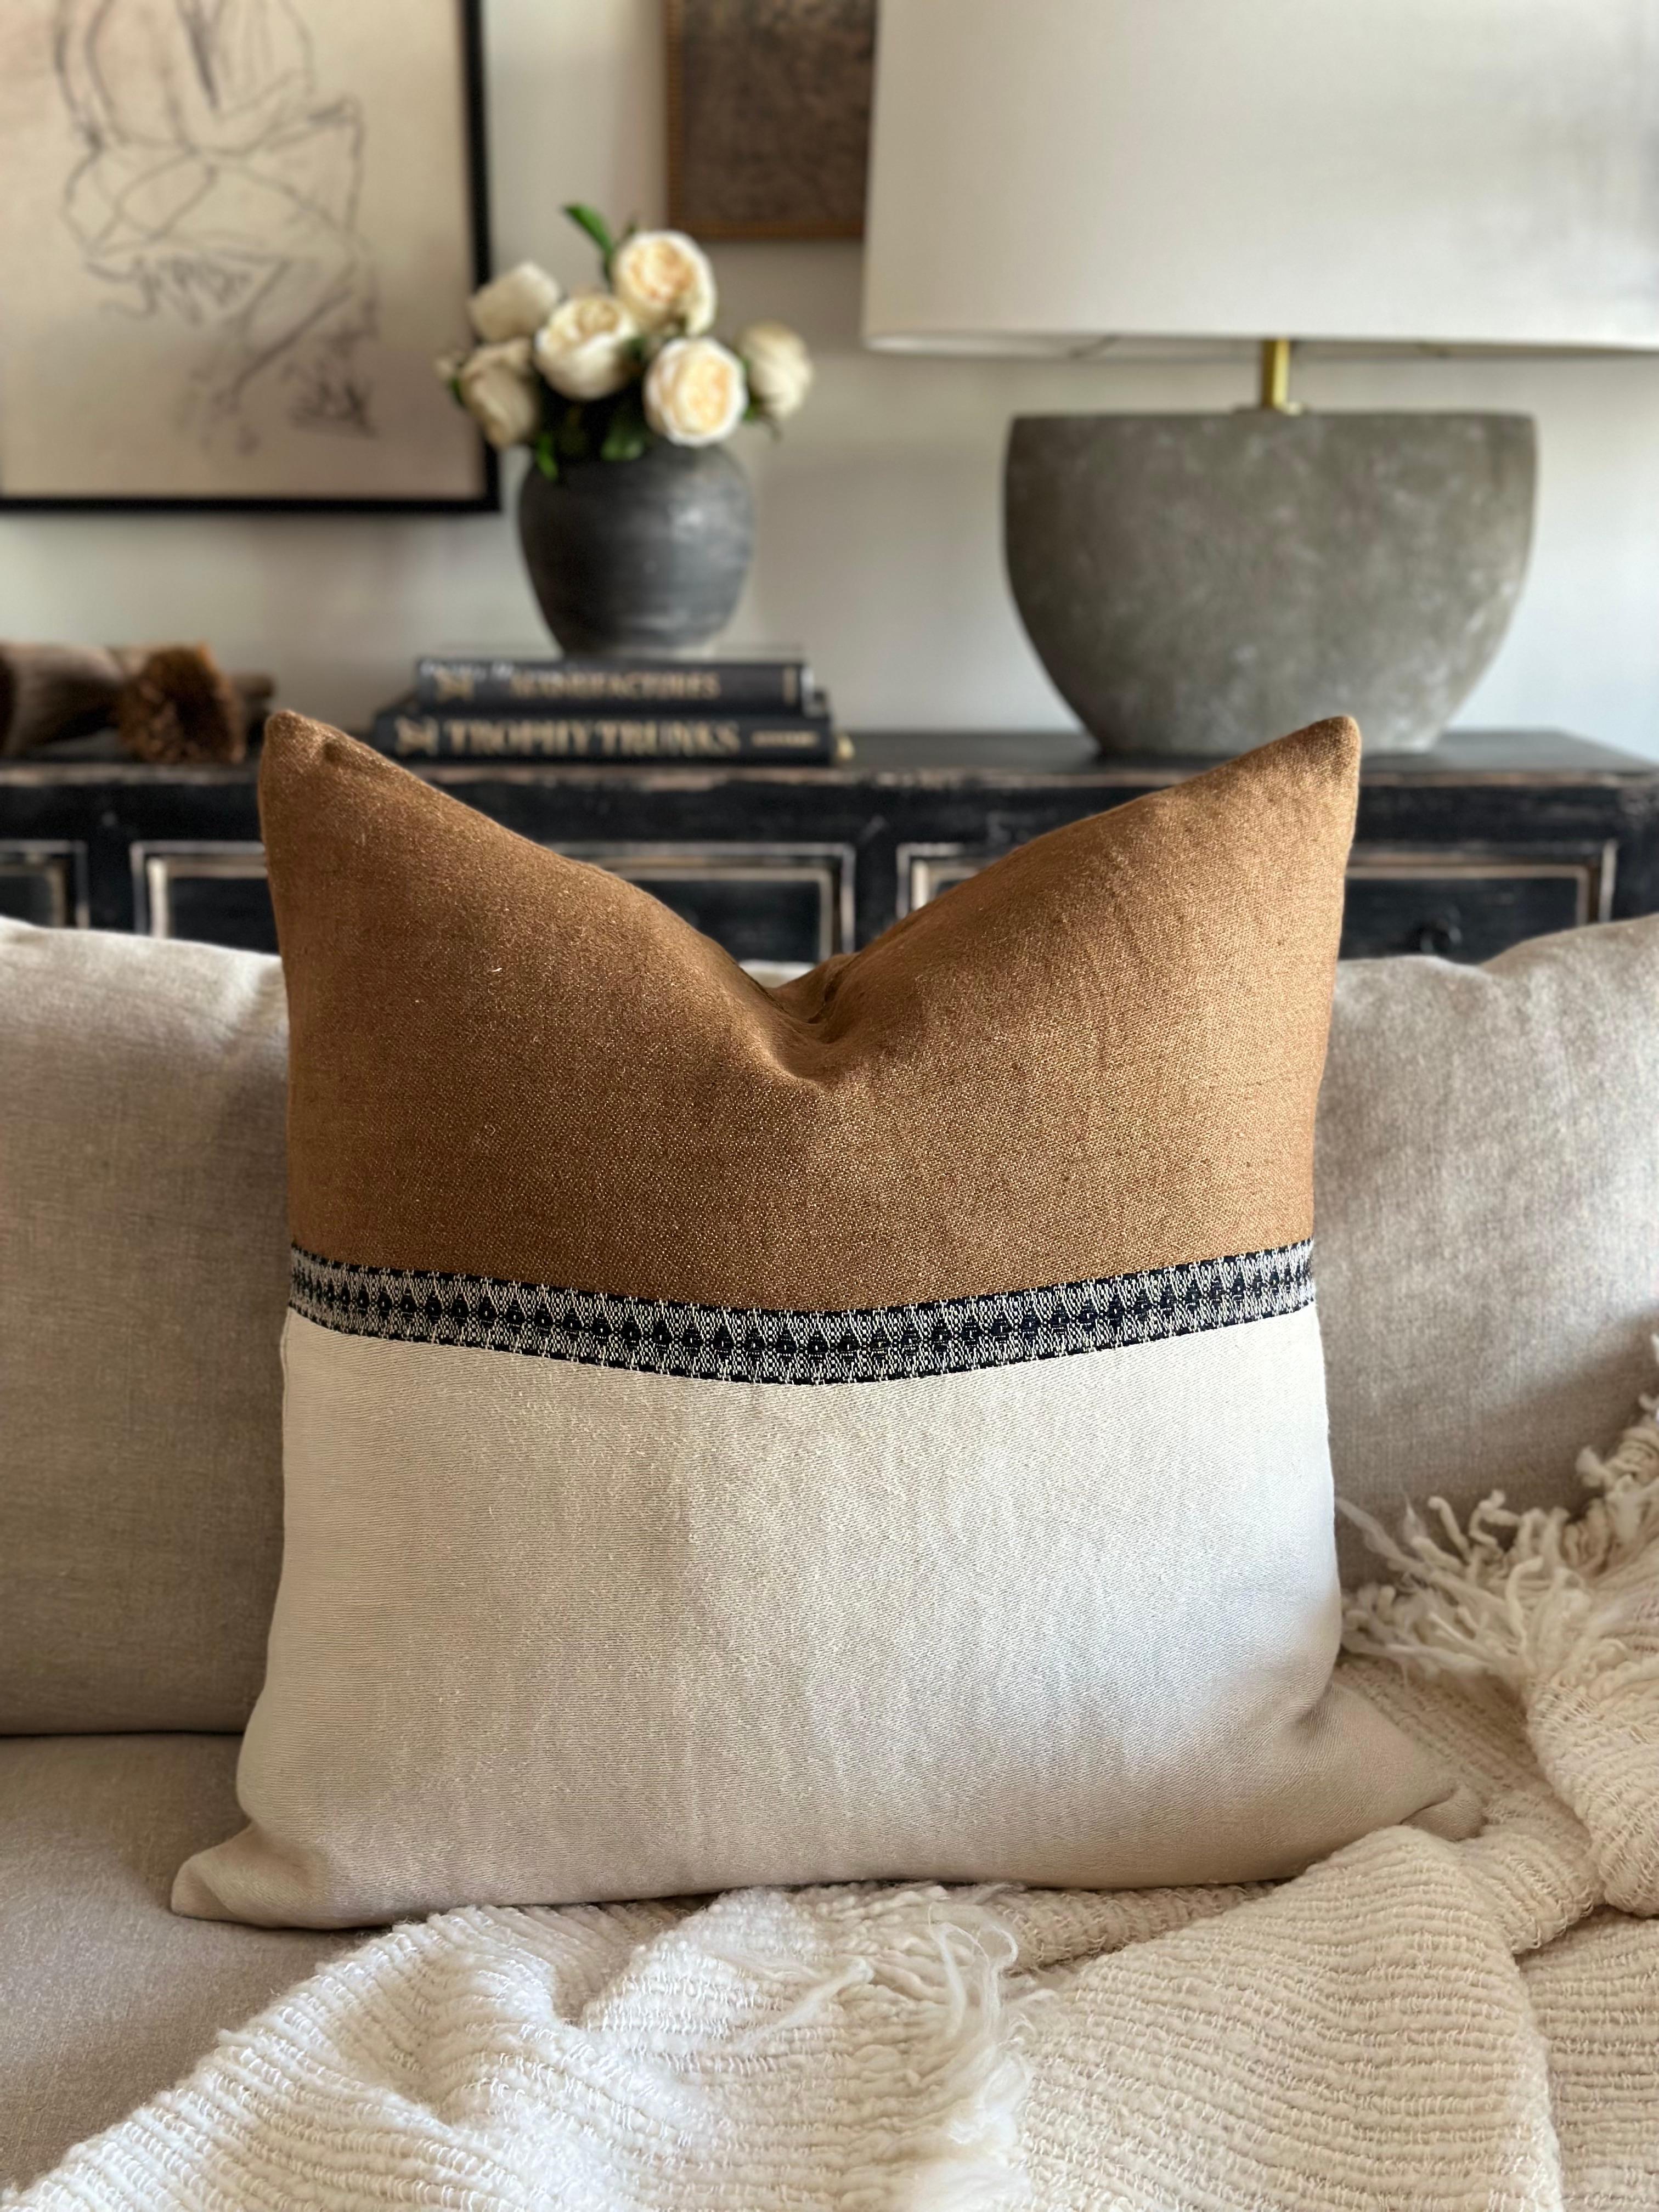 Etienne Accent Pillow 
A natural linen pillow with havane (french) brown, and black woven accent band through the center of the pillow. Washed finish, and hidden zipper closure.  Includes a down feather accent pillow.

100% LI
Size: 25